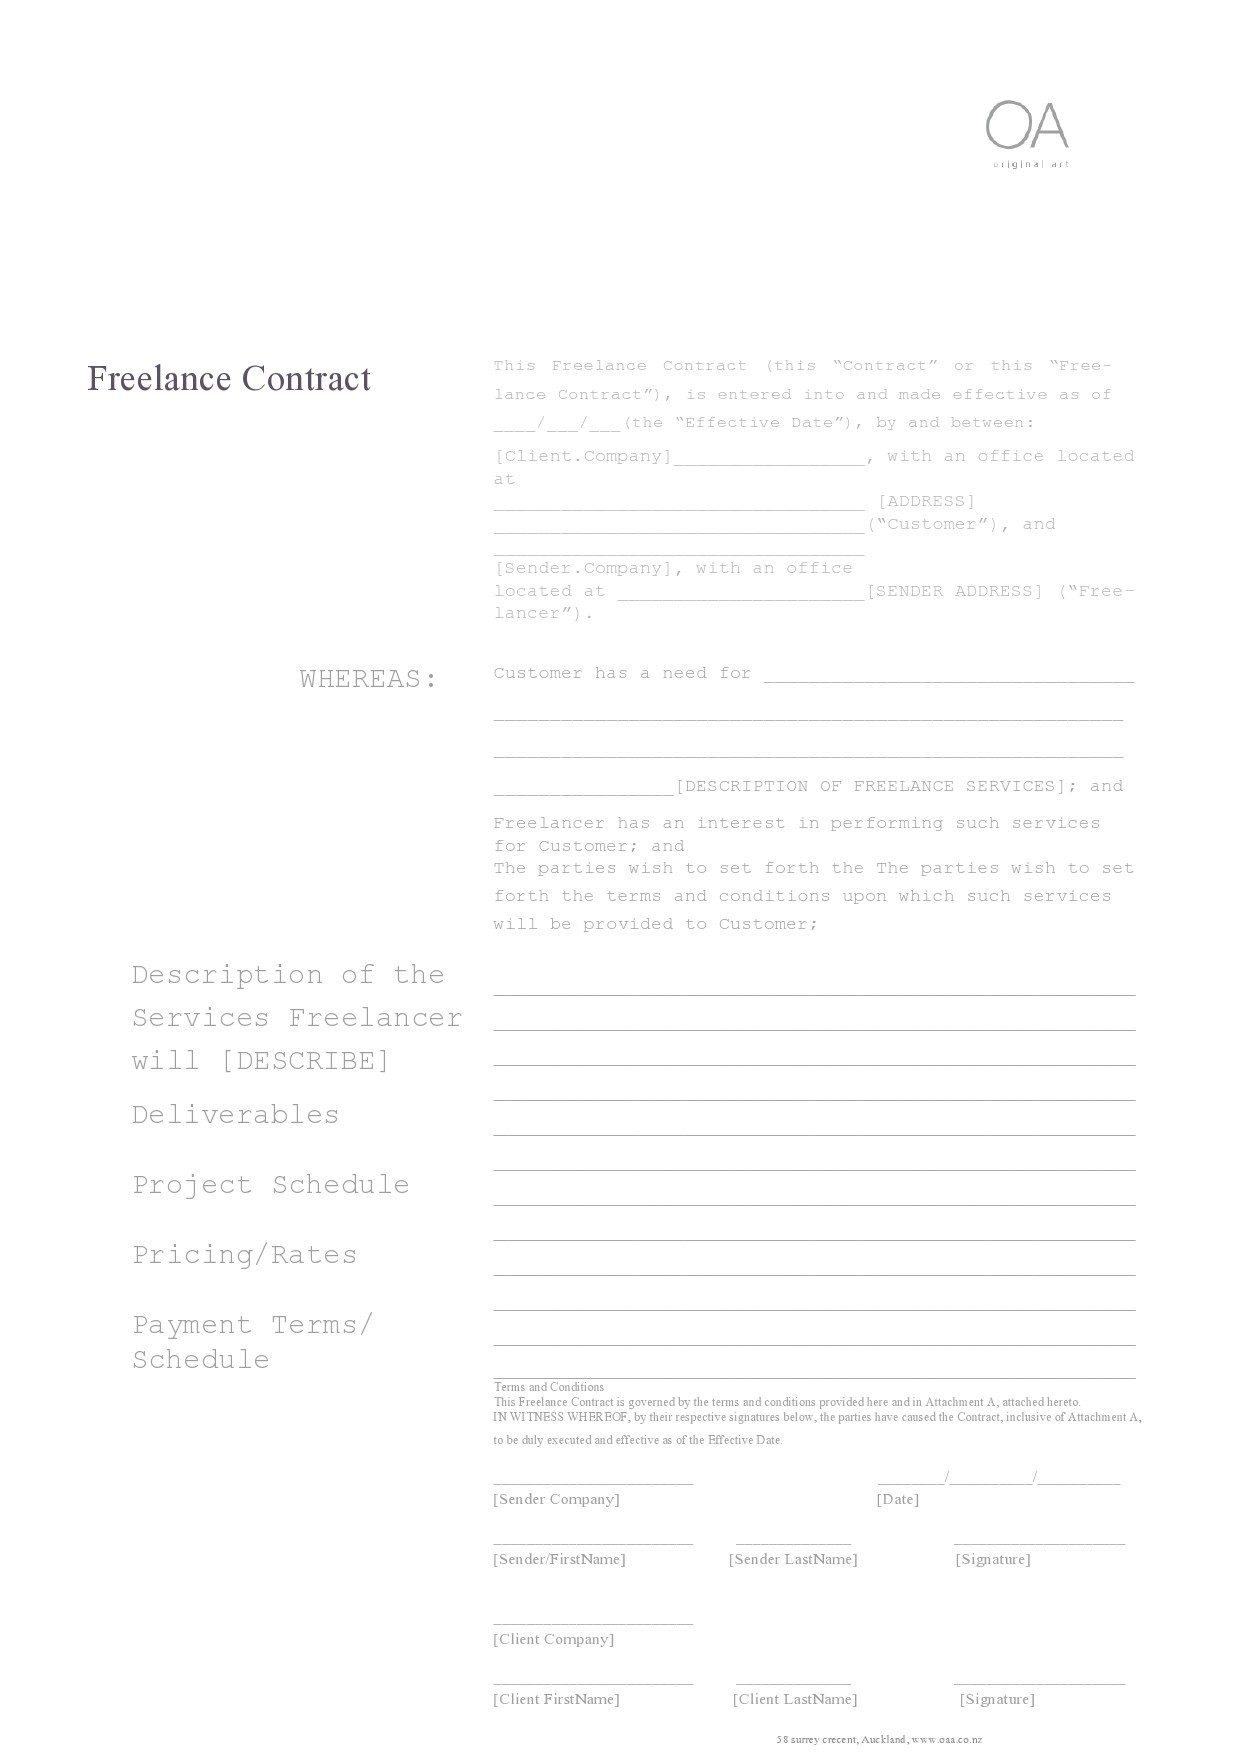 38 Free Freelance Contract Templates (MS Word) ᐅ TemplateLab